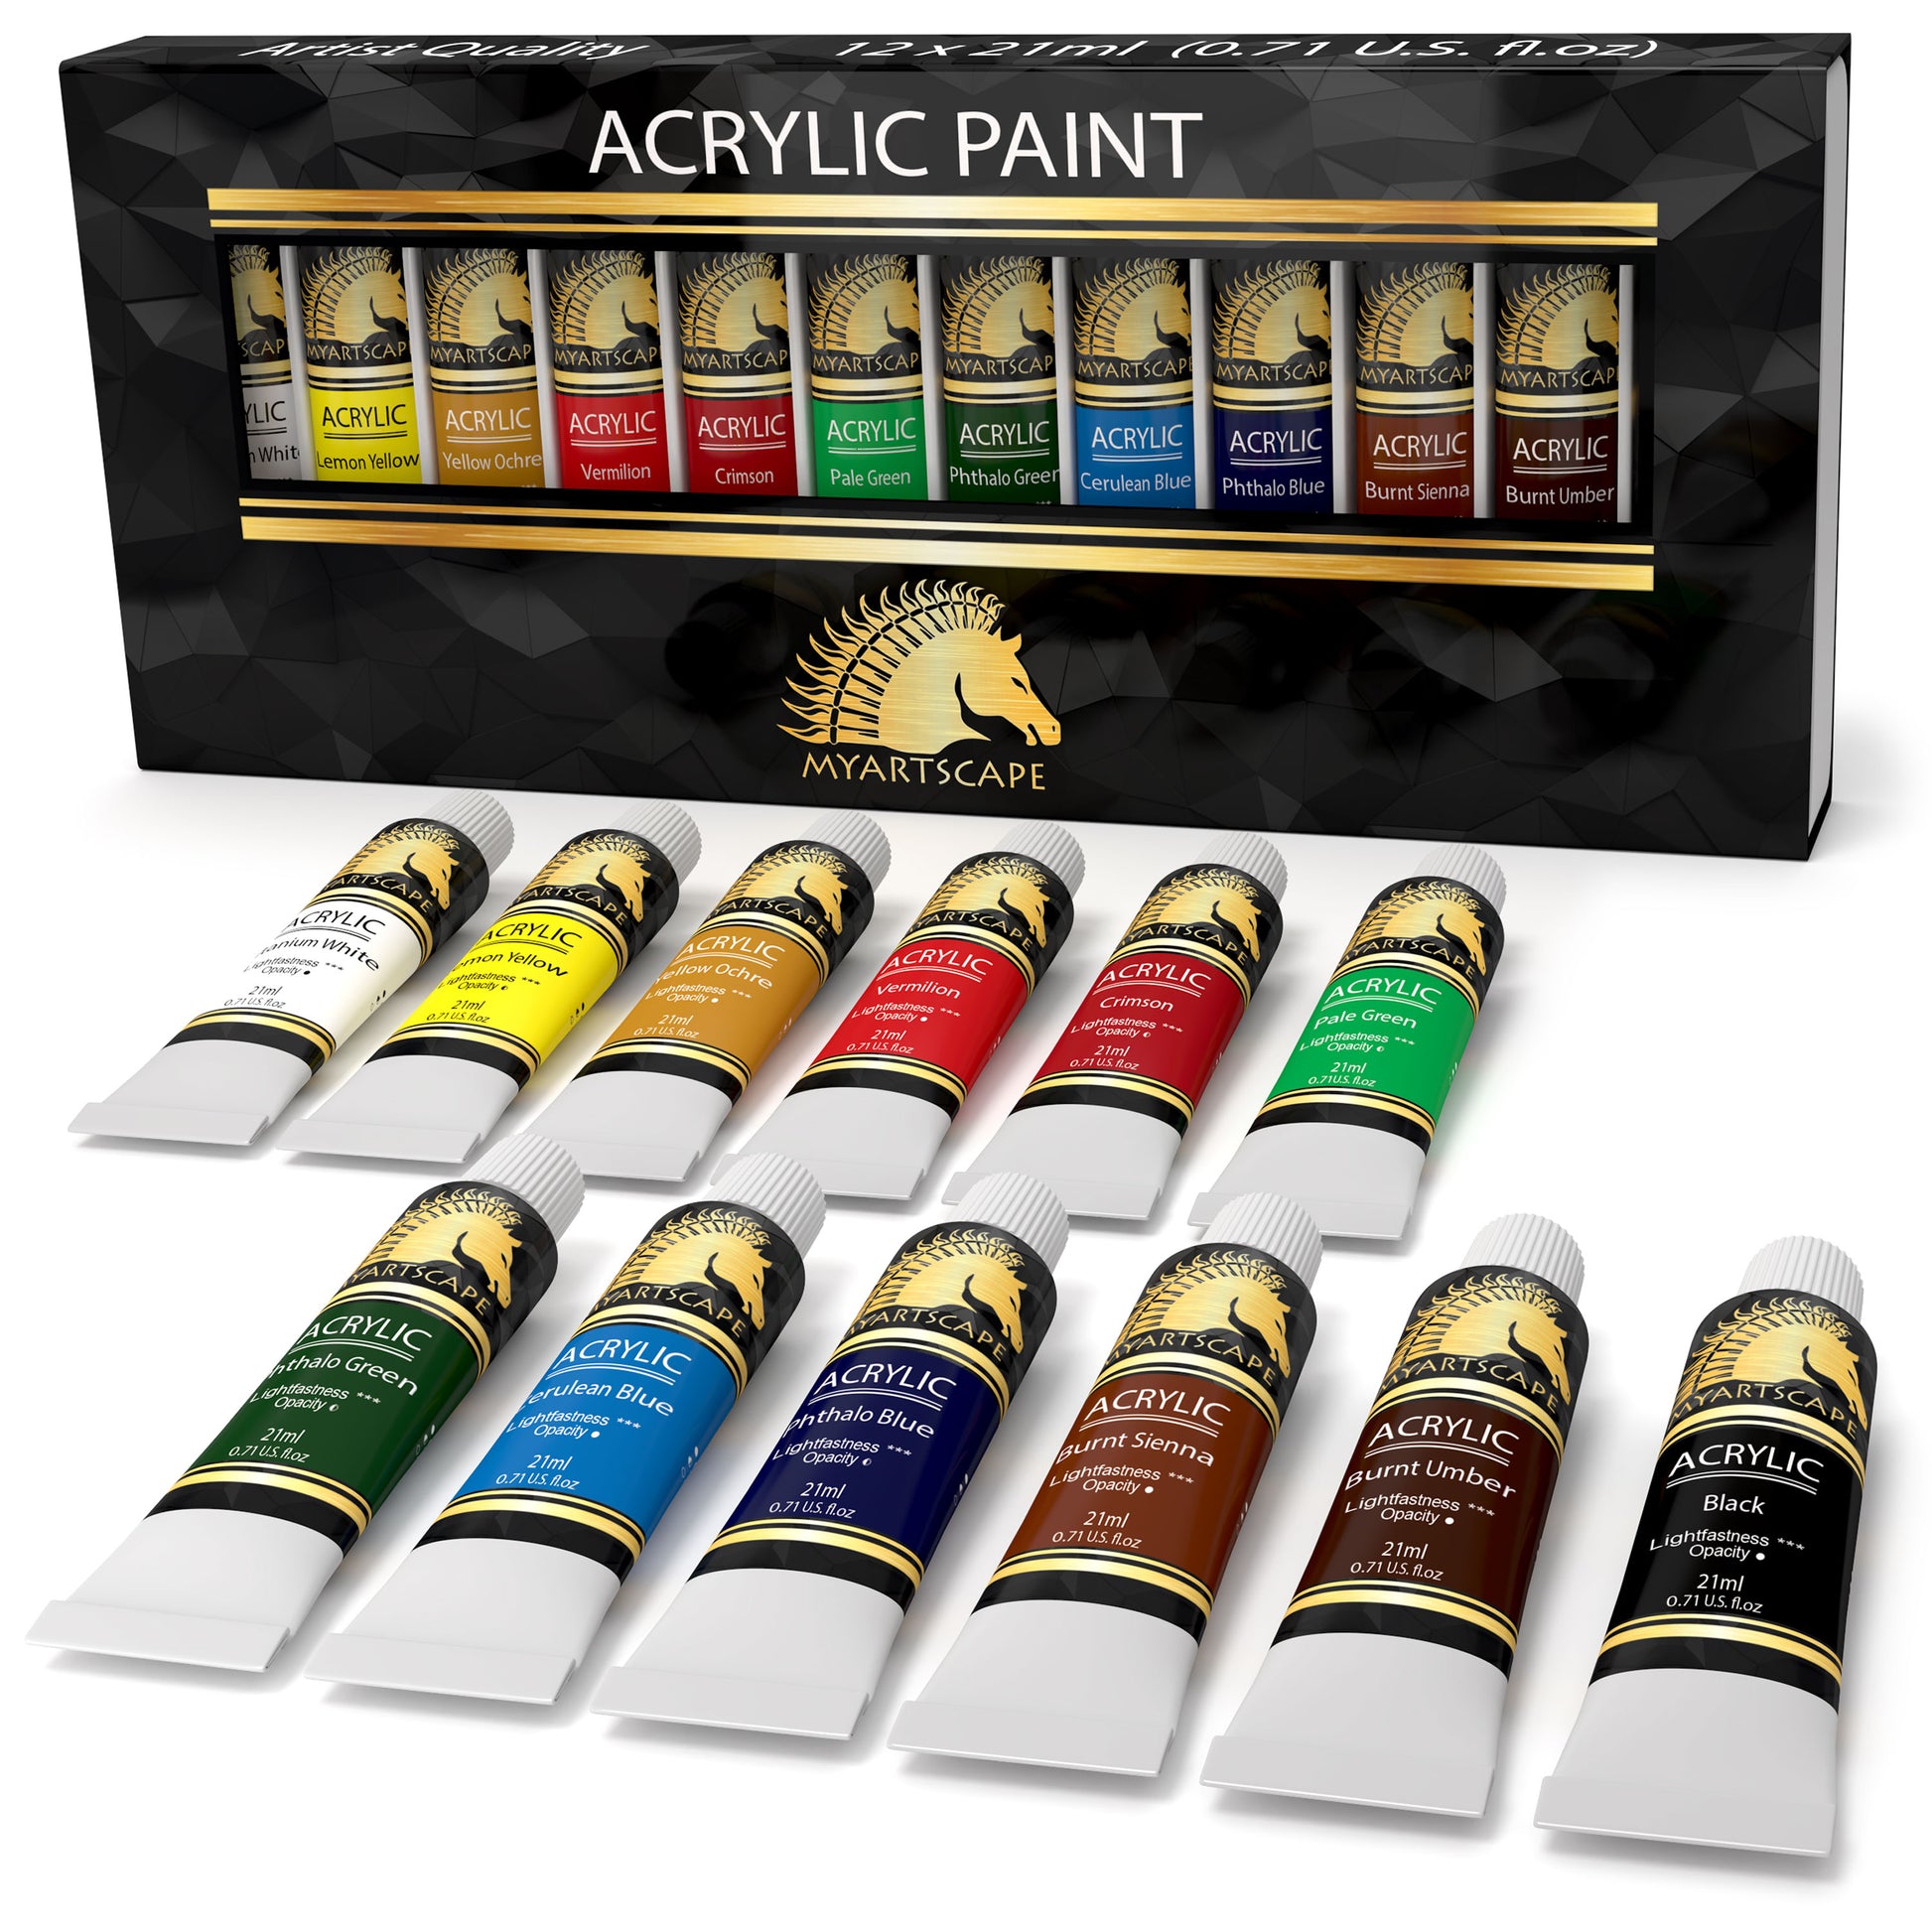 U.S. Art Supply Professional 24 Color Set of Acrylic Paint in 12ml Tubes - Rich Vivid Colors for Artists, Students